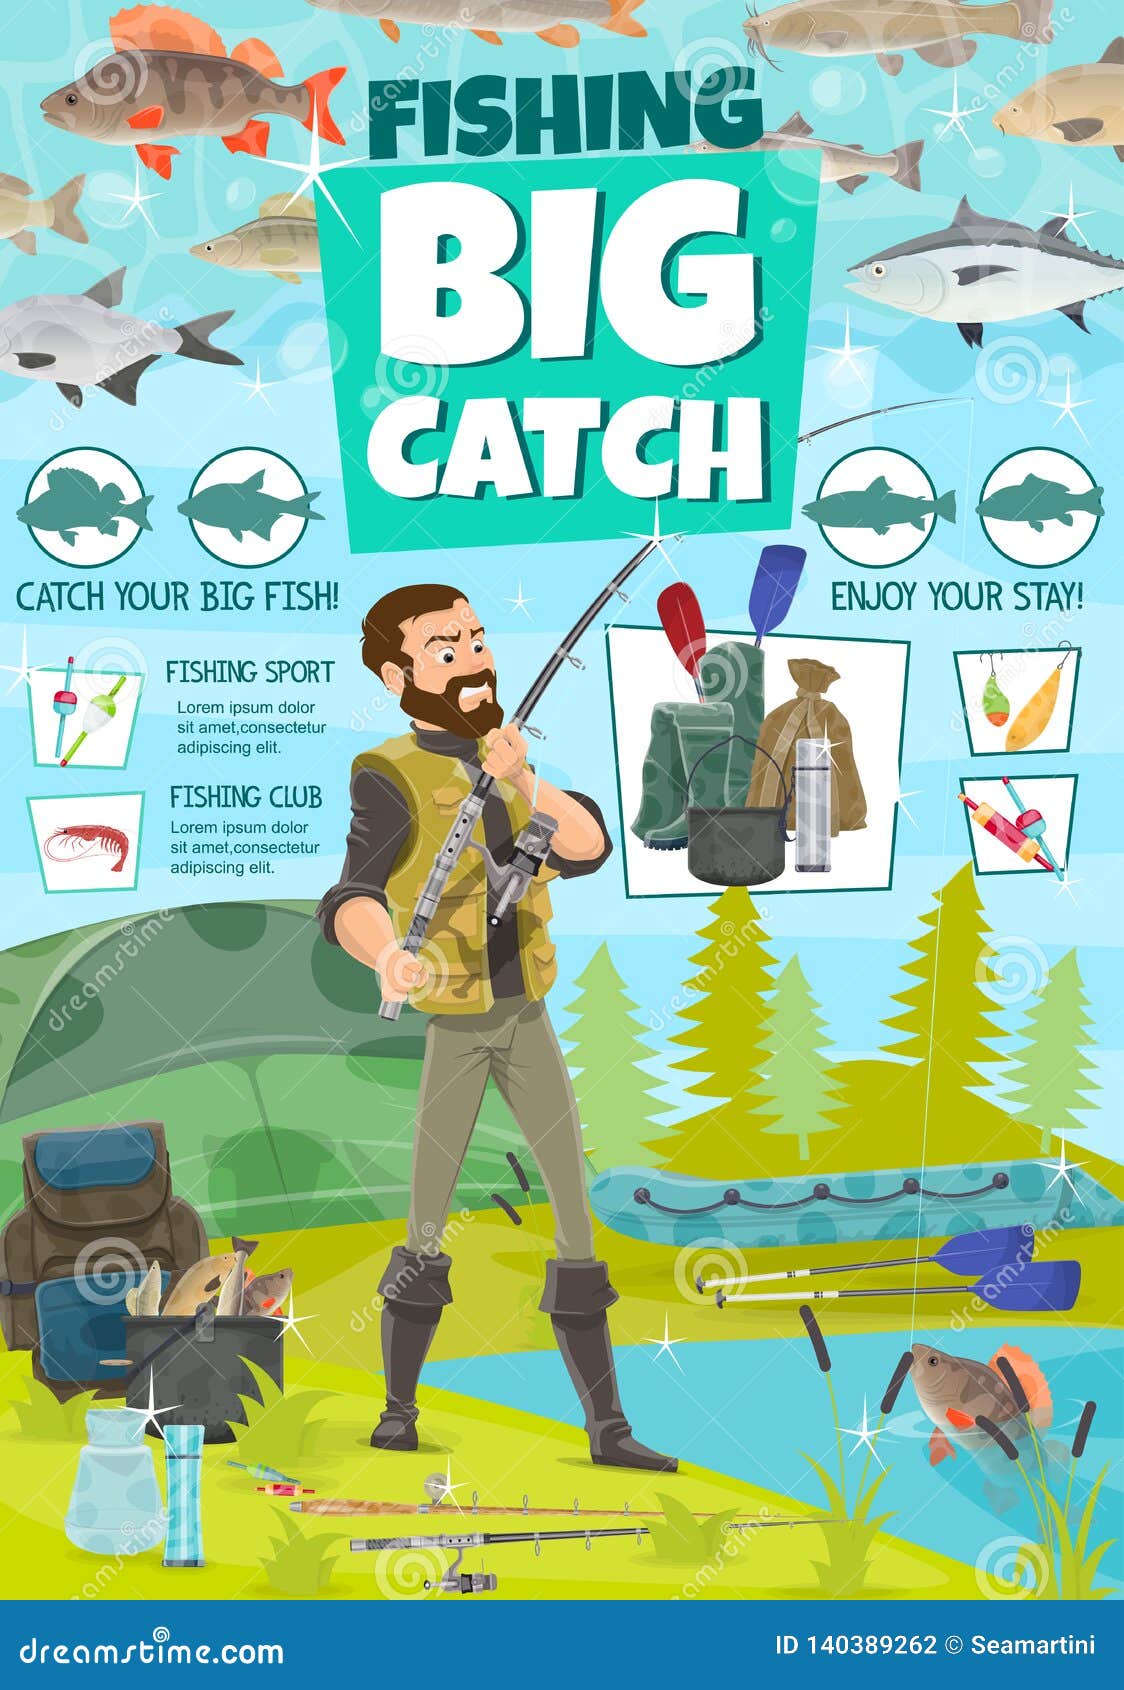 Fishing Equipment and Fisher Catch Fish Stock Vector